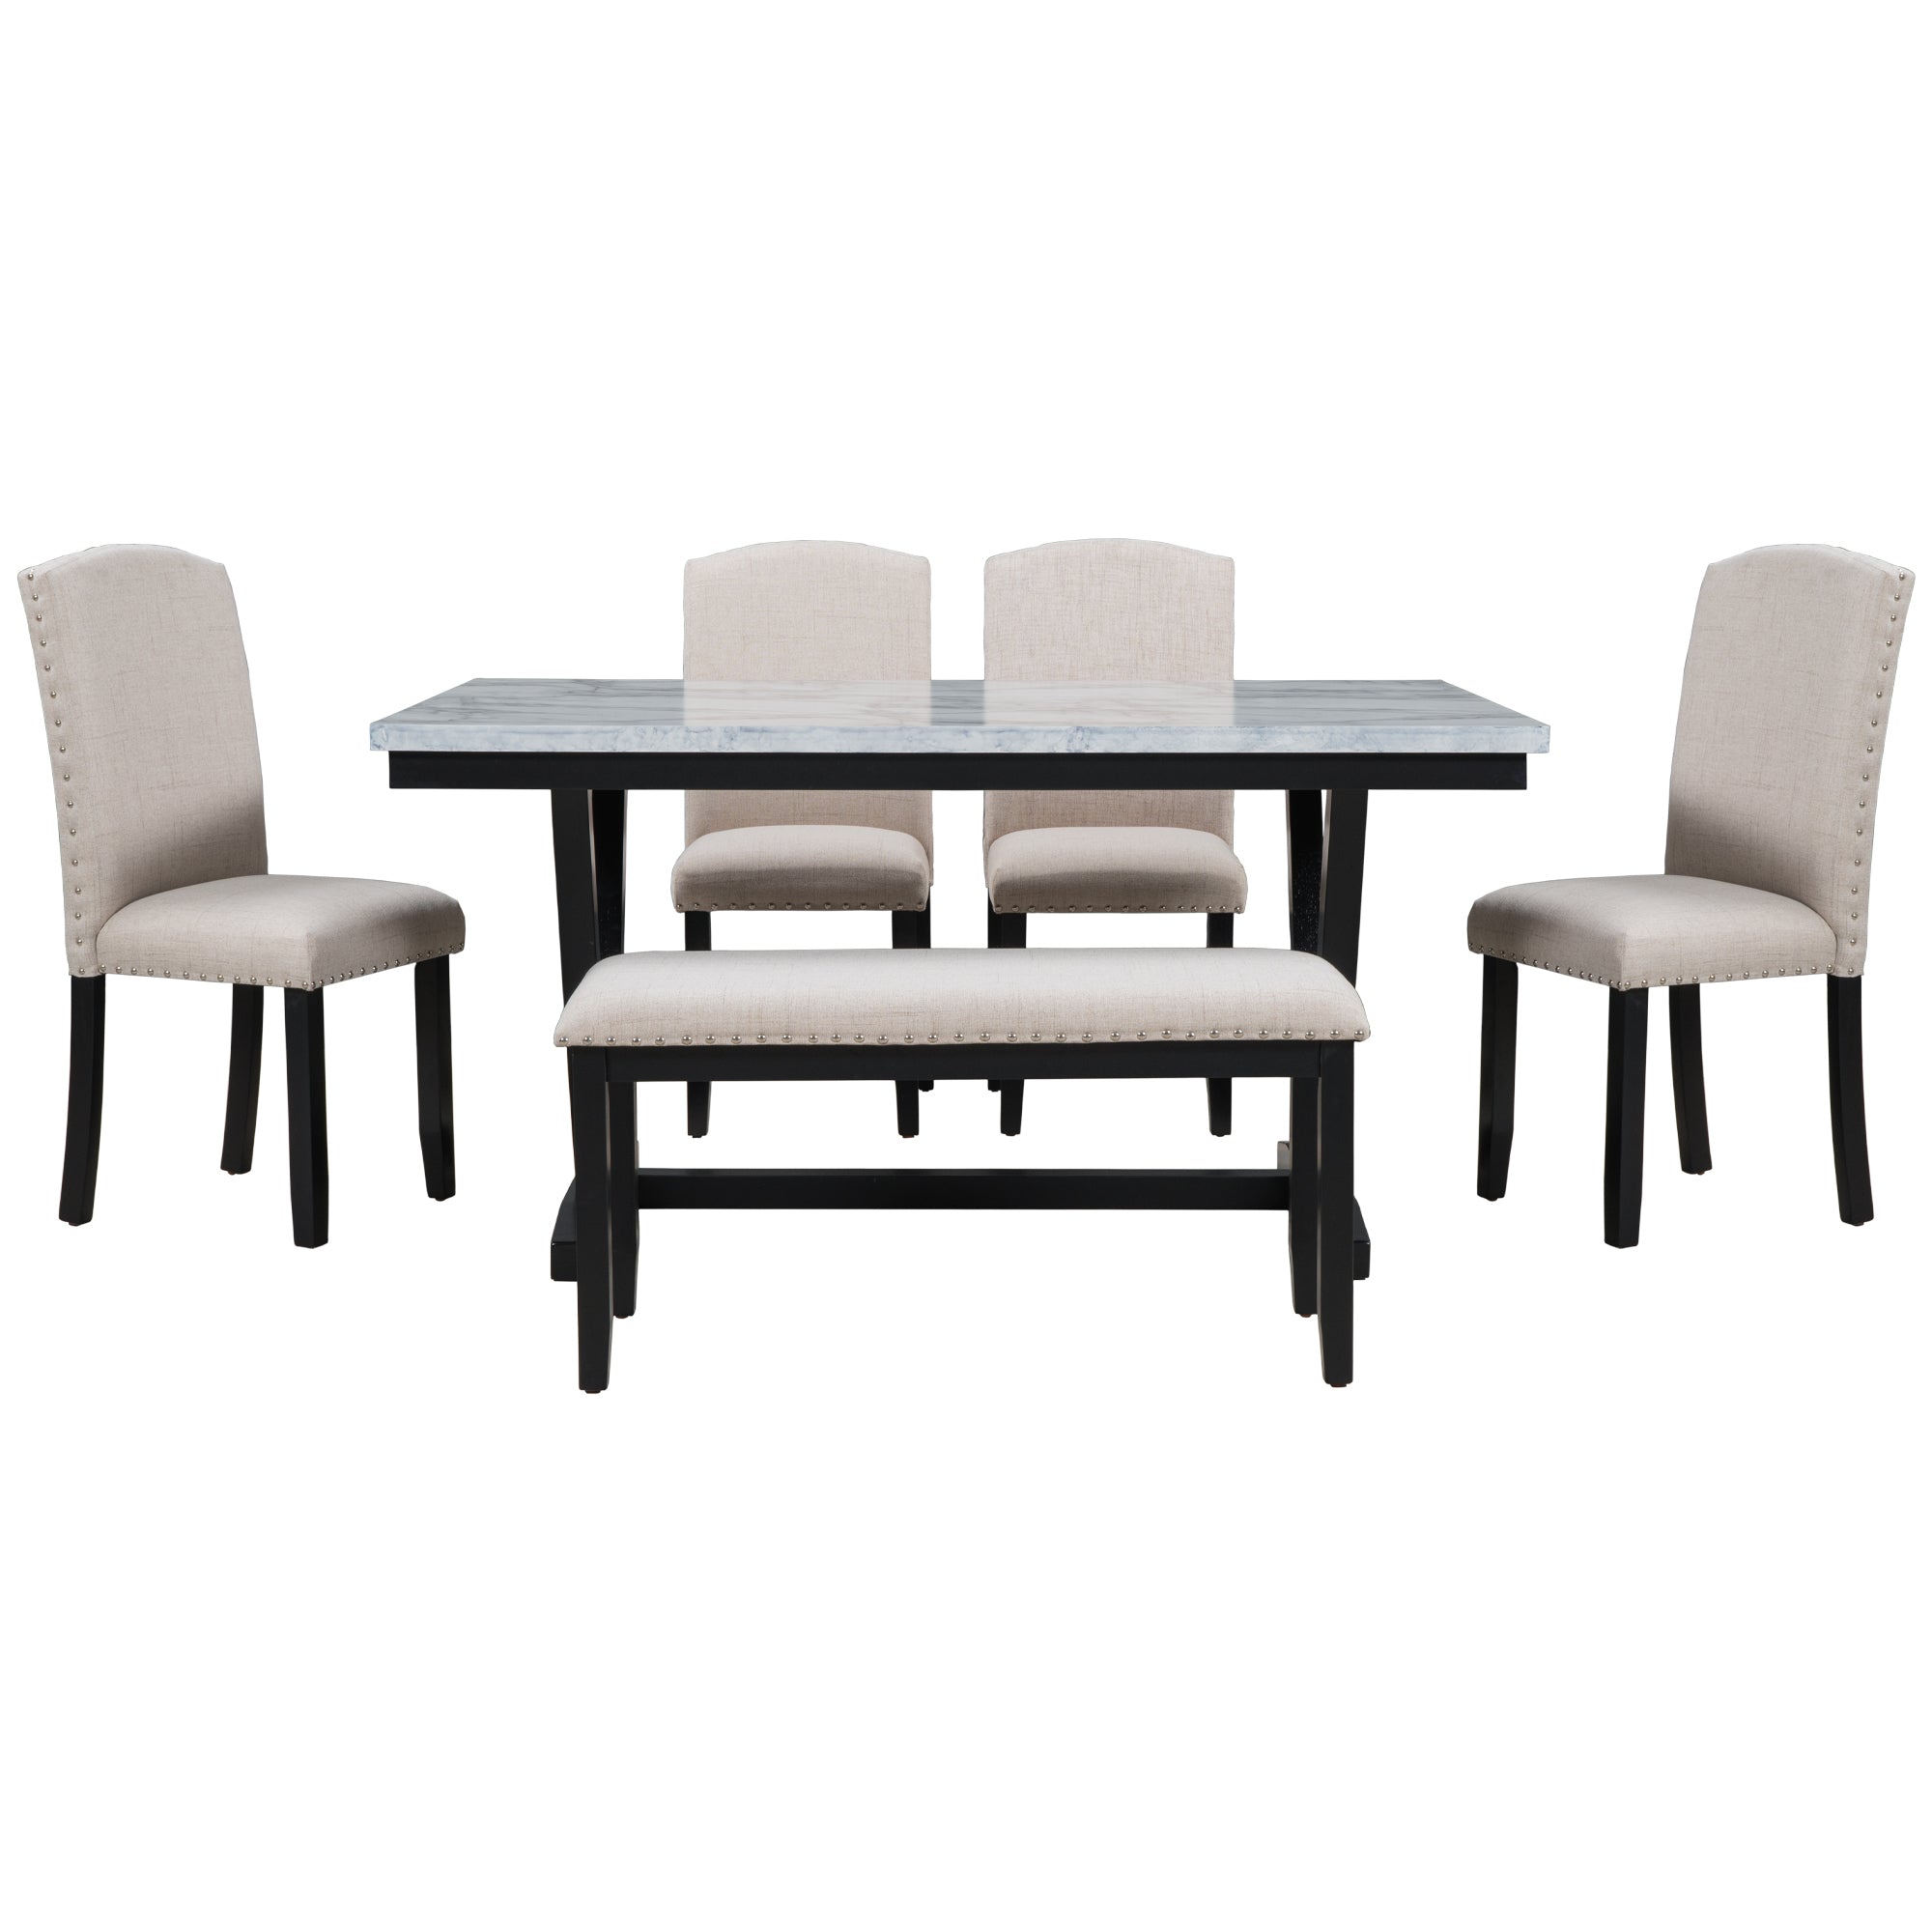 TREXM Modern Style 6-piece Dining Table with 4 Chairs & 1 Bench, Table with Marbled Veneers Tabletop and V-shaped Table Legs (White)